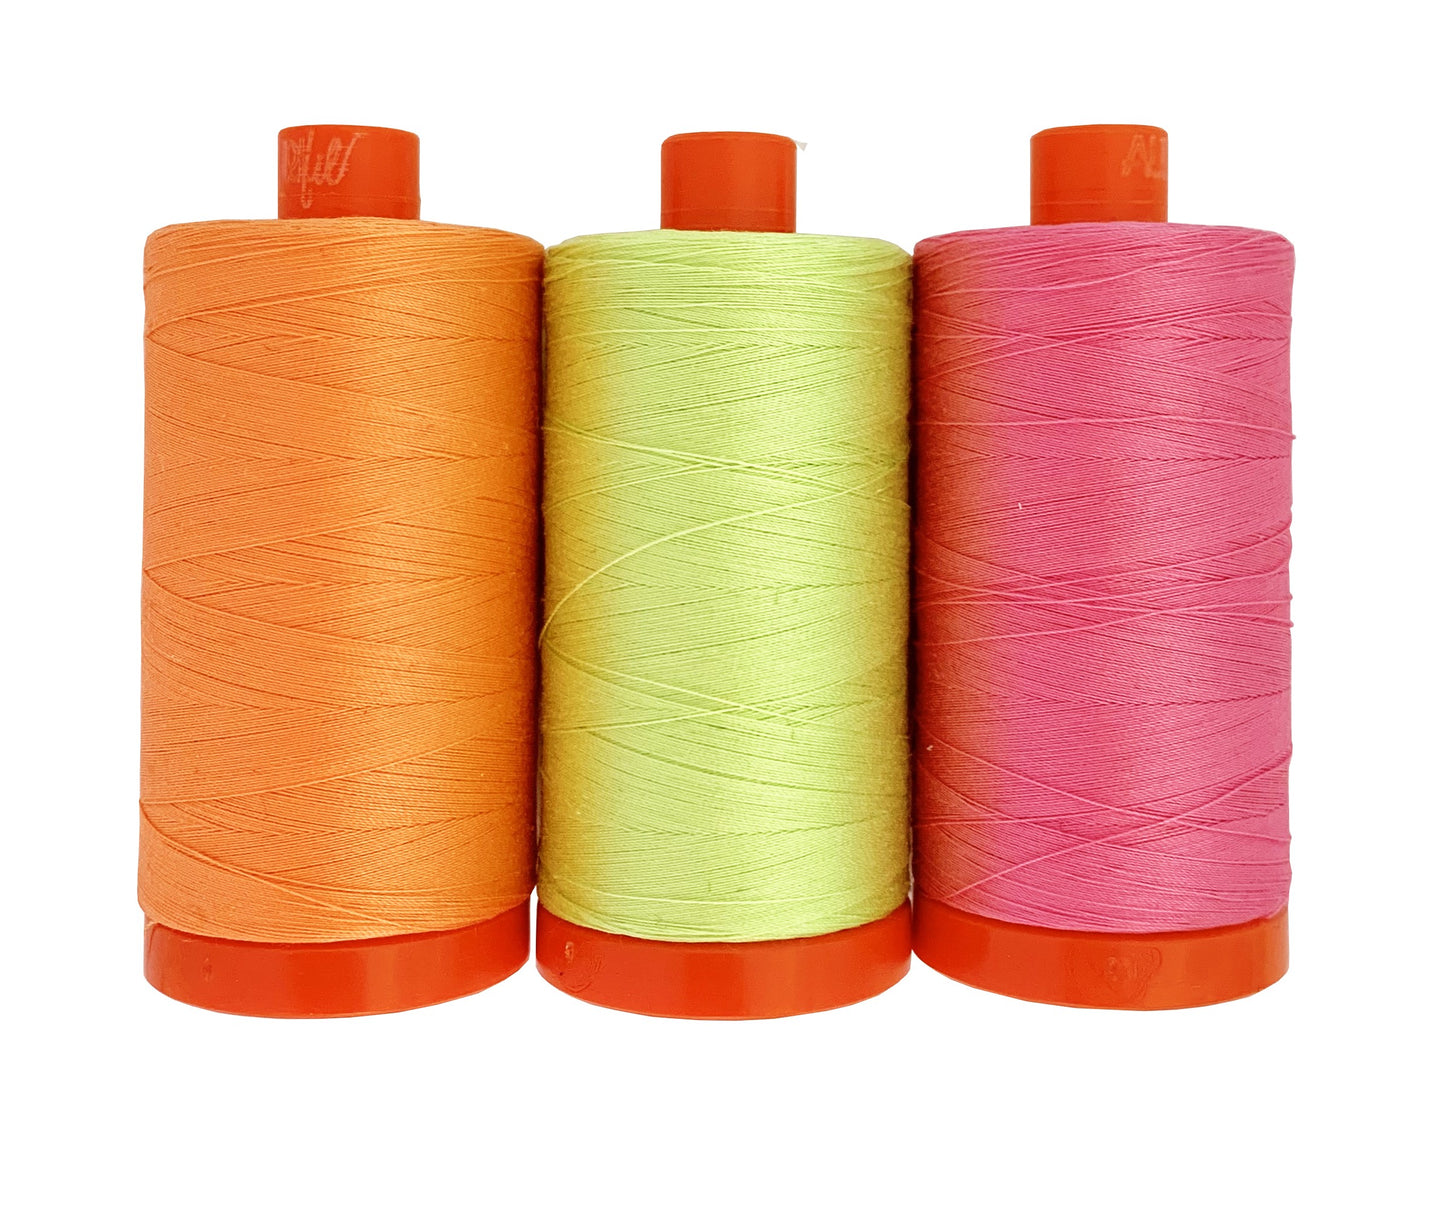 Neon's & Neutrals by Tula Pink 3 Large Spools